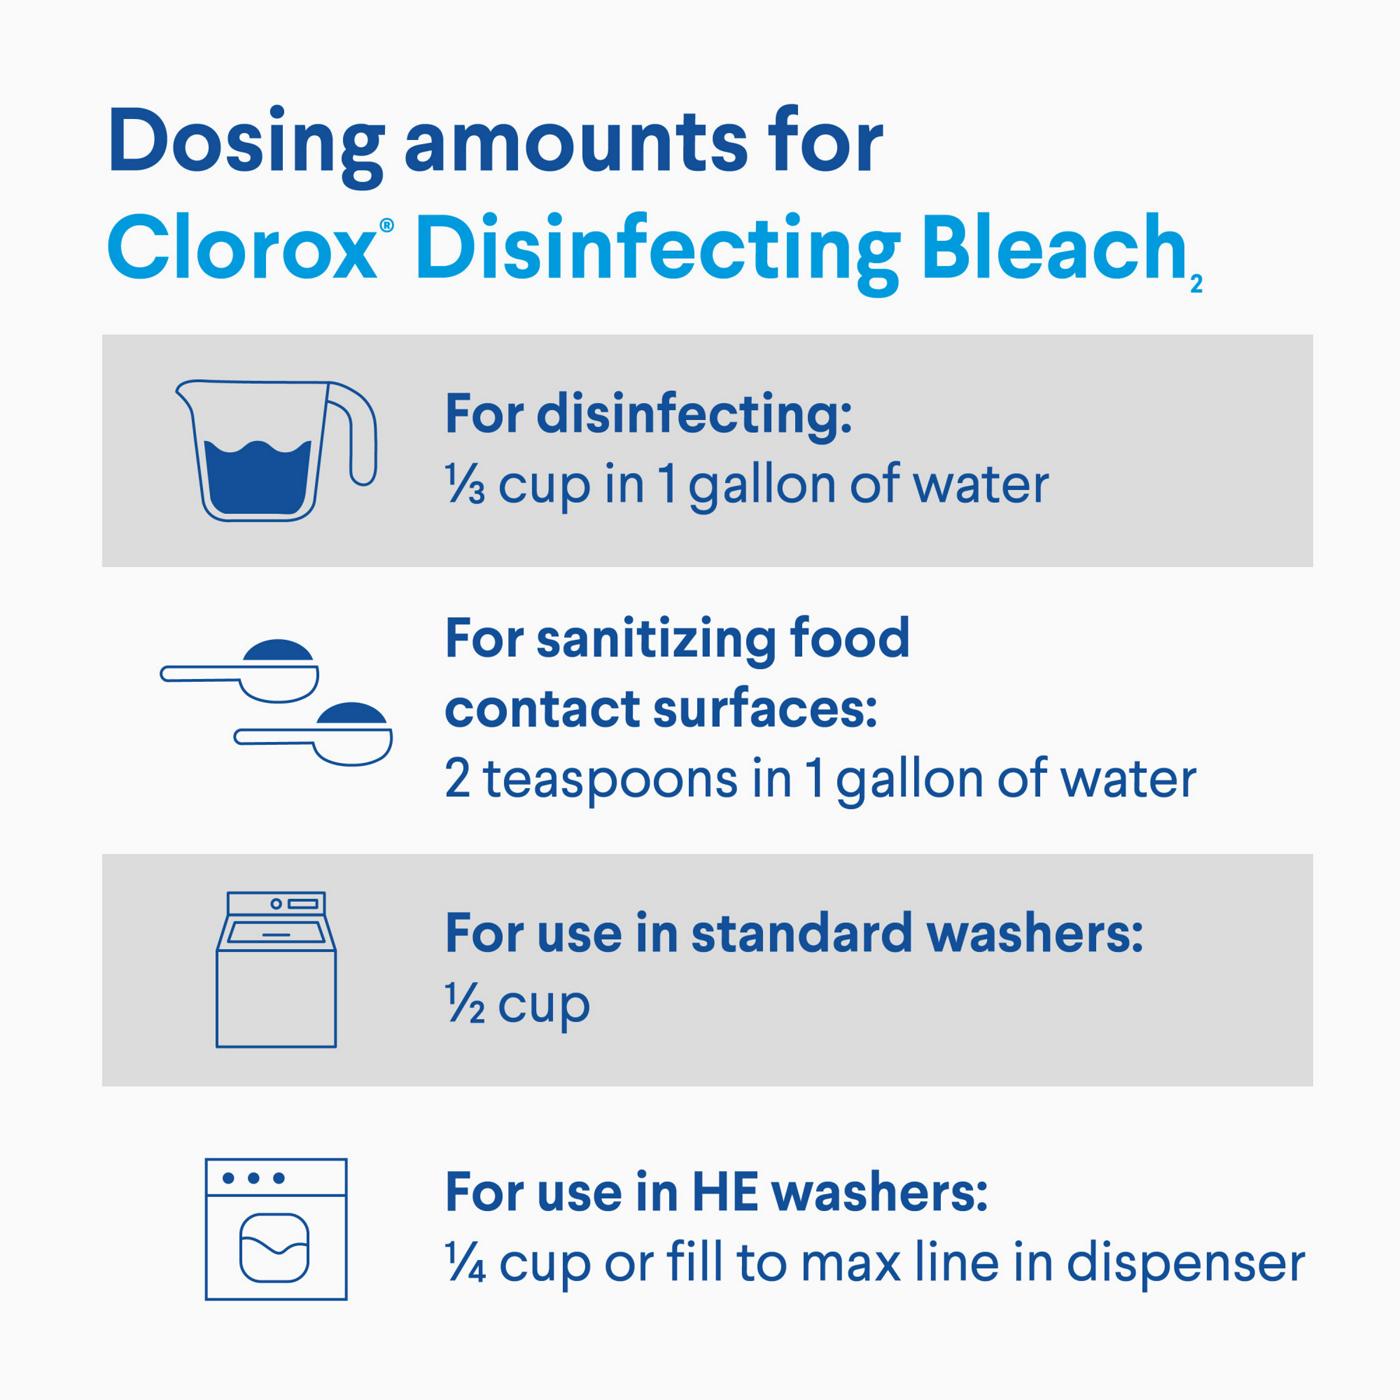 Clorox Disinfecting Bleach; image 2 of 8